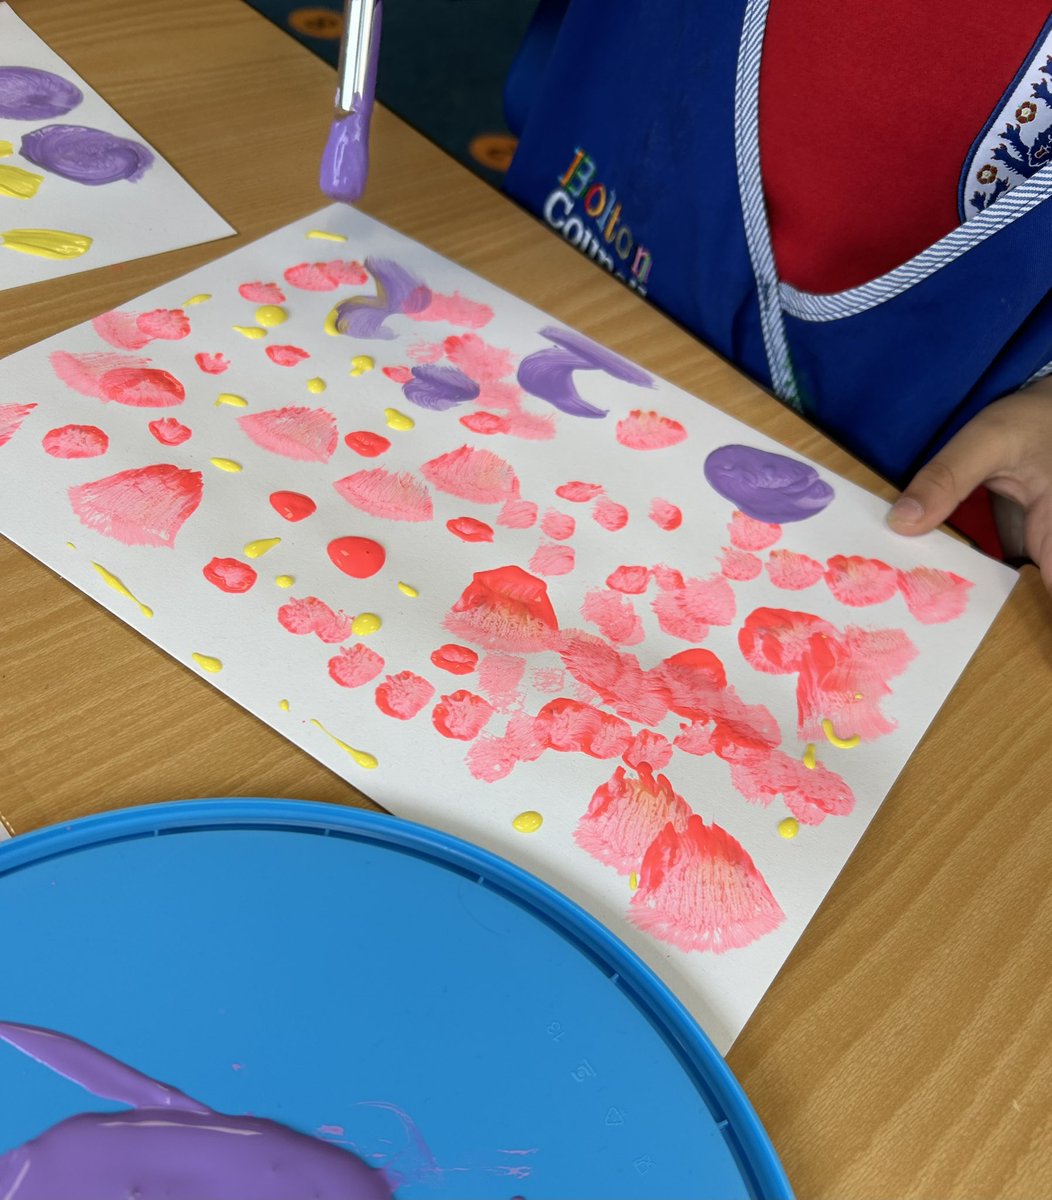 A great start to the day with Year 1 @StEthelbertsRCP @STOC_CAT experimenting with brushes using bright colours #markmaking #brushtechniques #brughtcolours